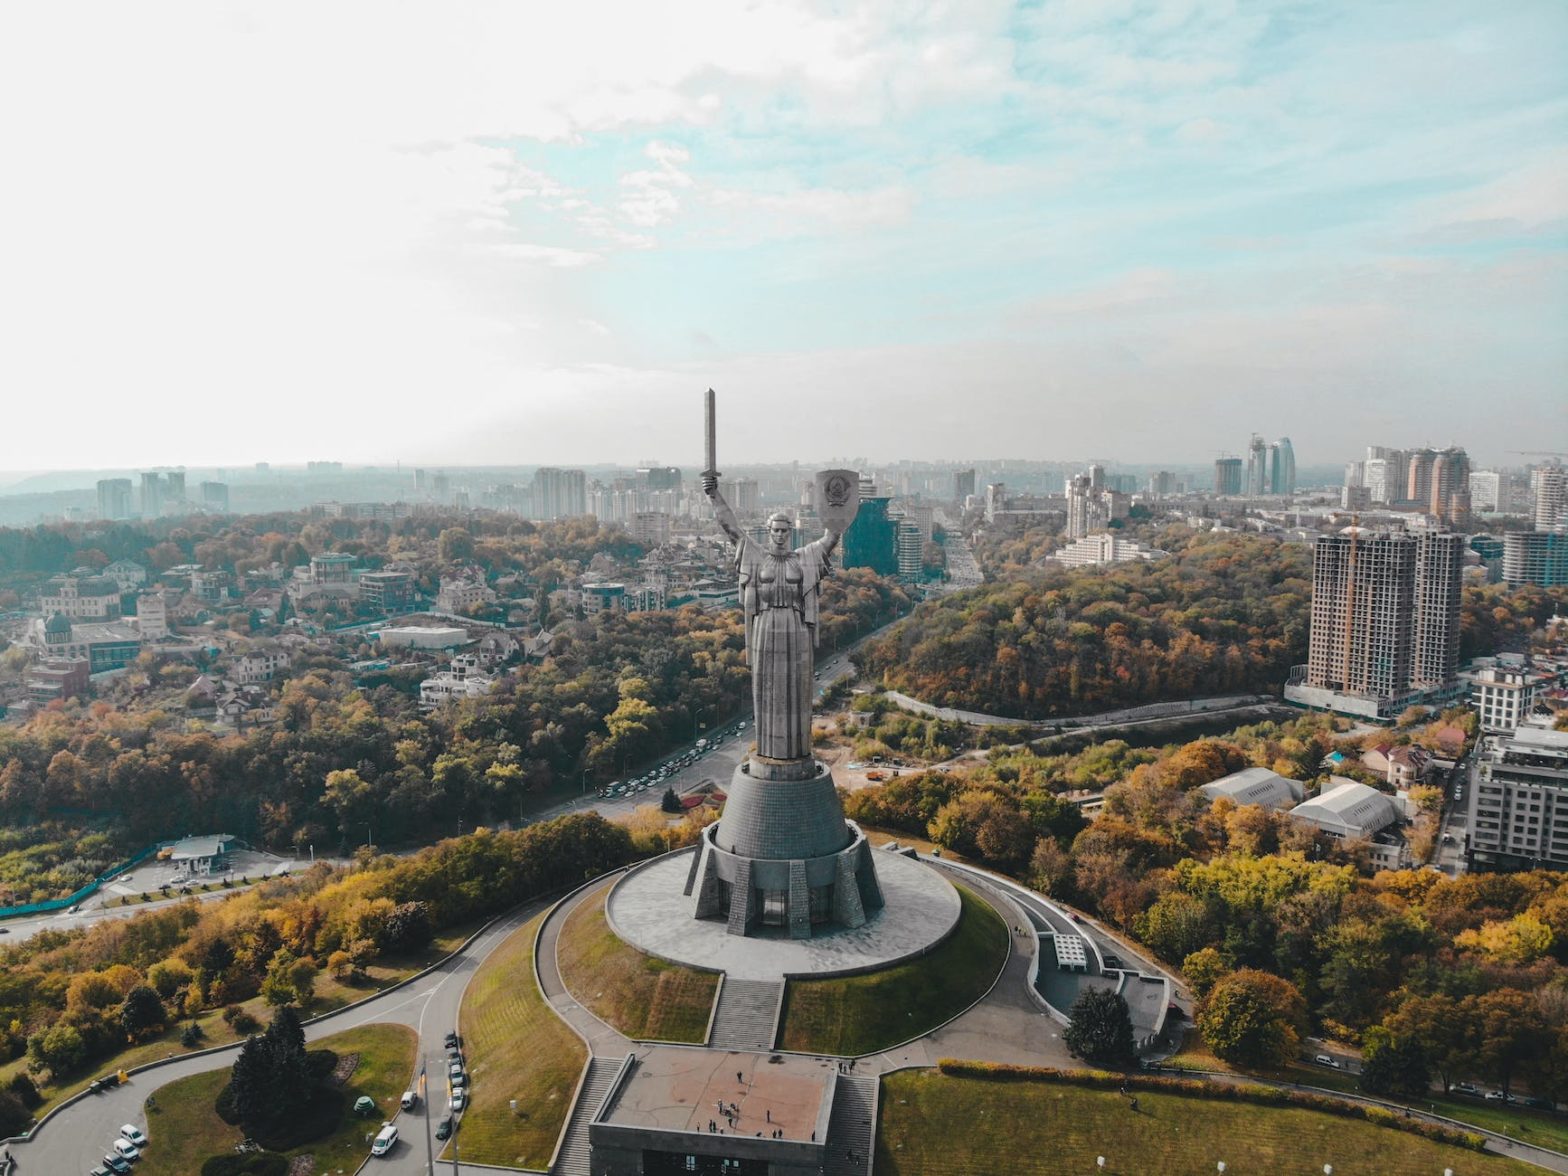 drone shot of motherland monument and the city of kyiv